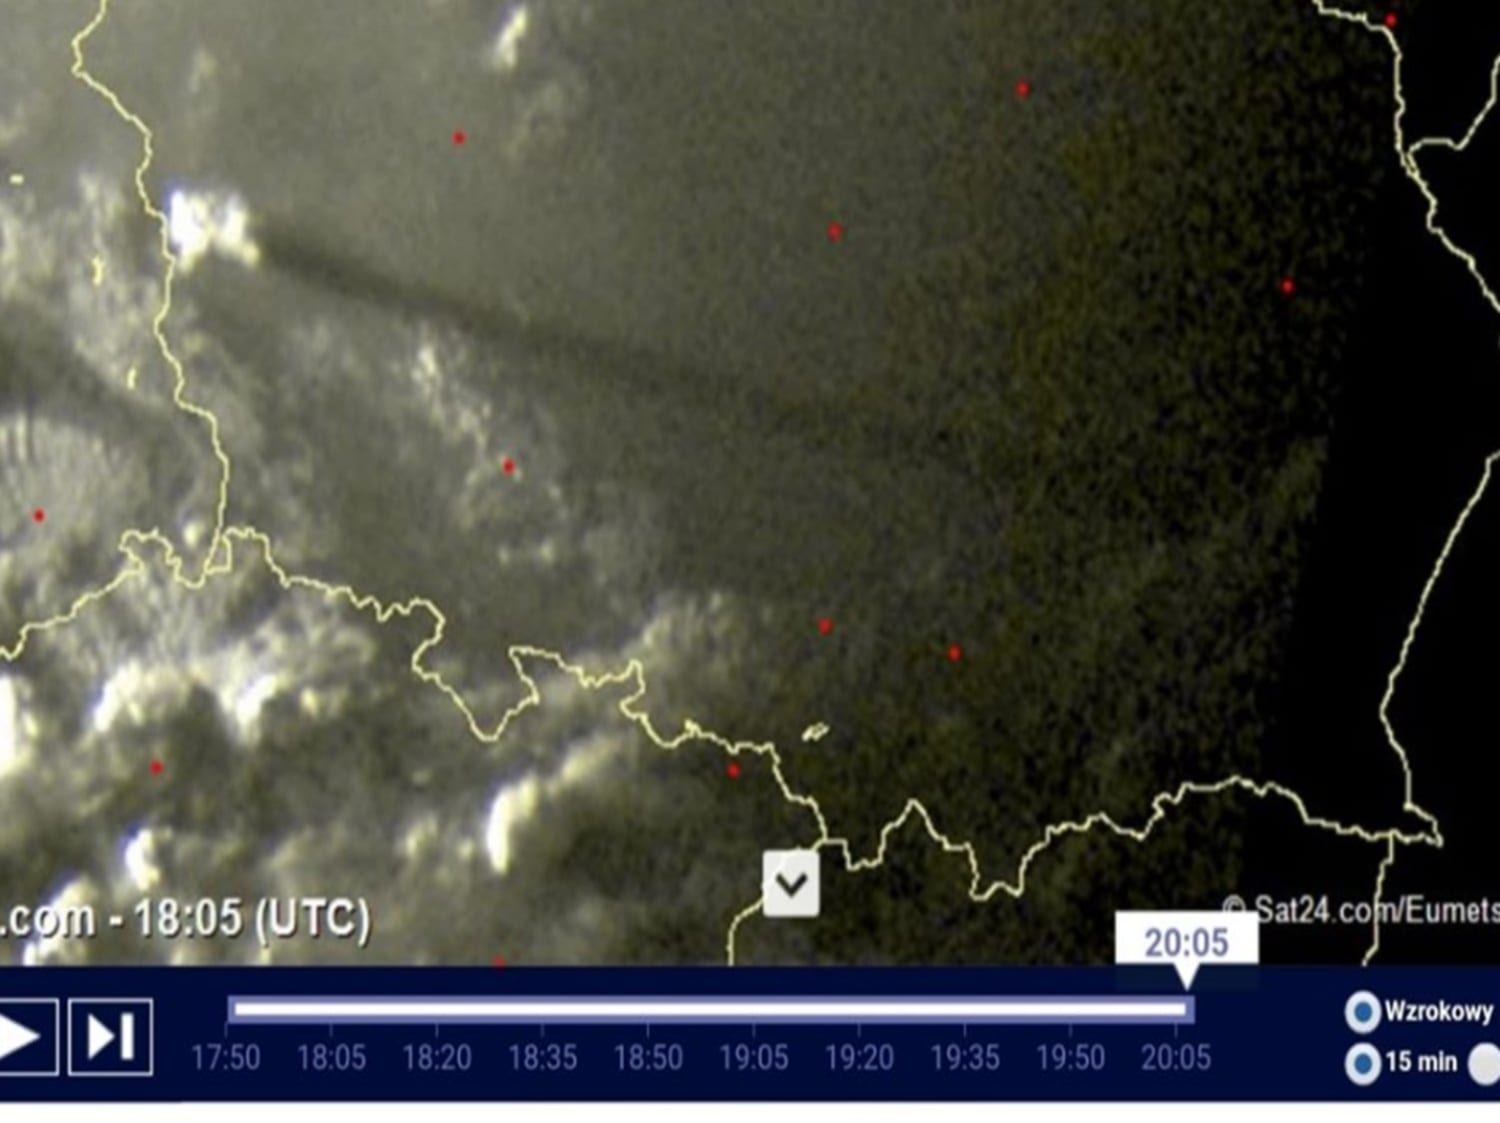 A Supercell Cloud formed on the Polish-German border today and casted a 500km shadow at sunset. A very rare occurrence.